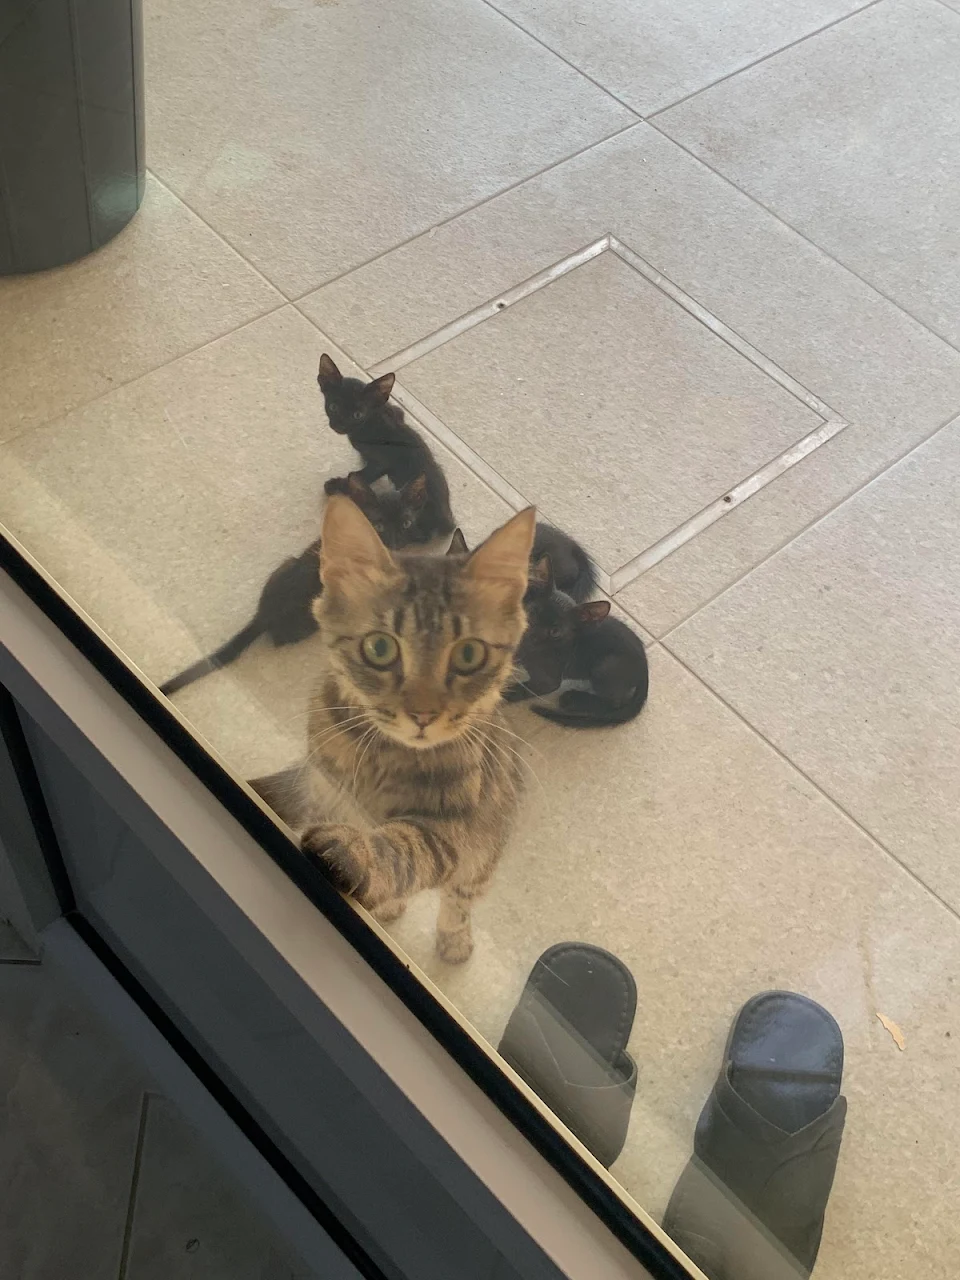 Our neighbour’s abandoned cat and her kittens